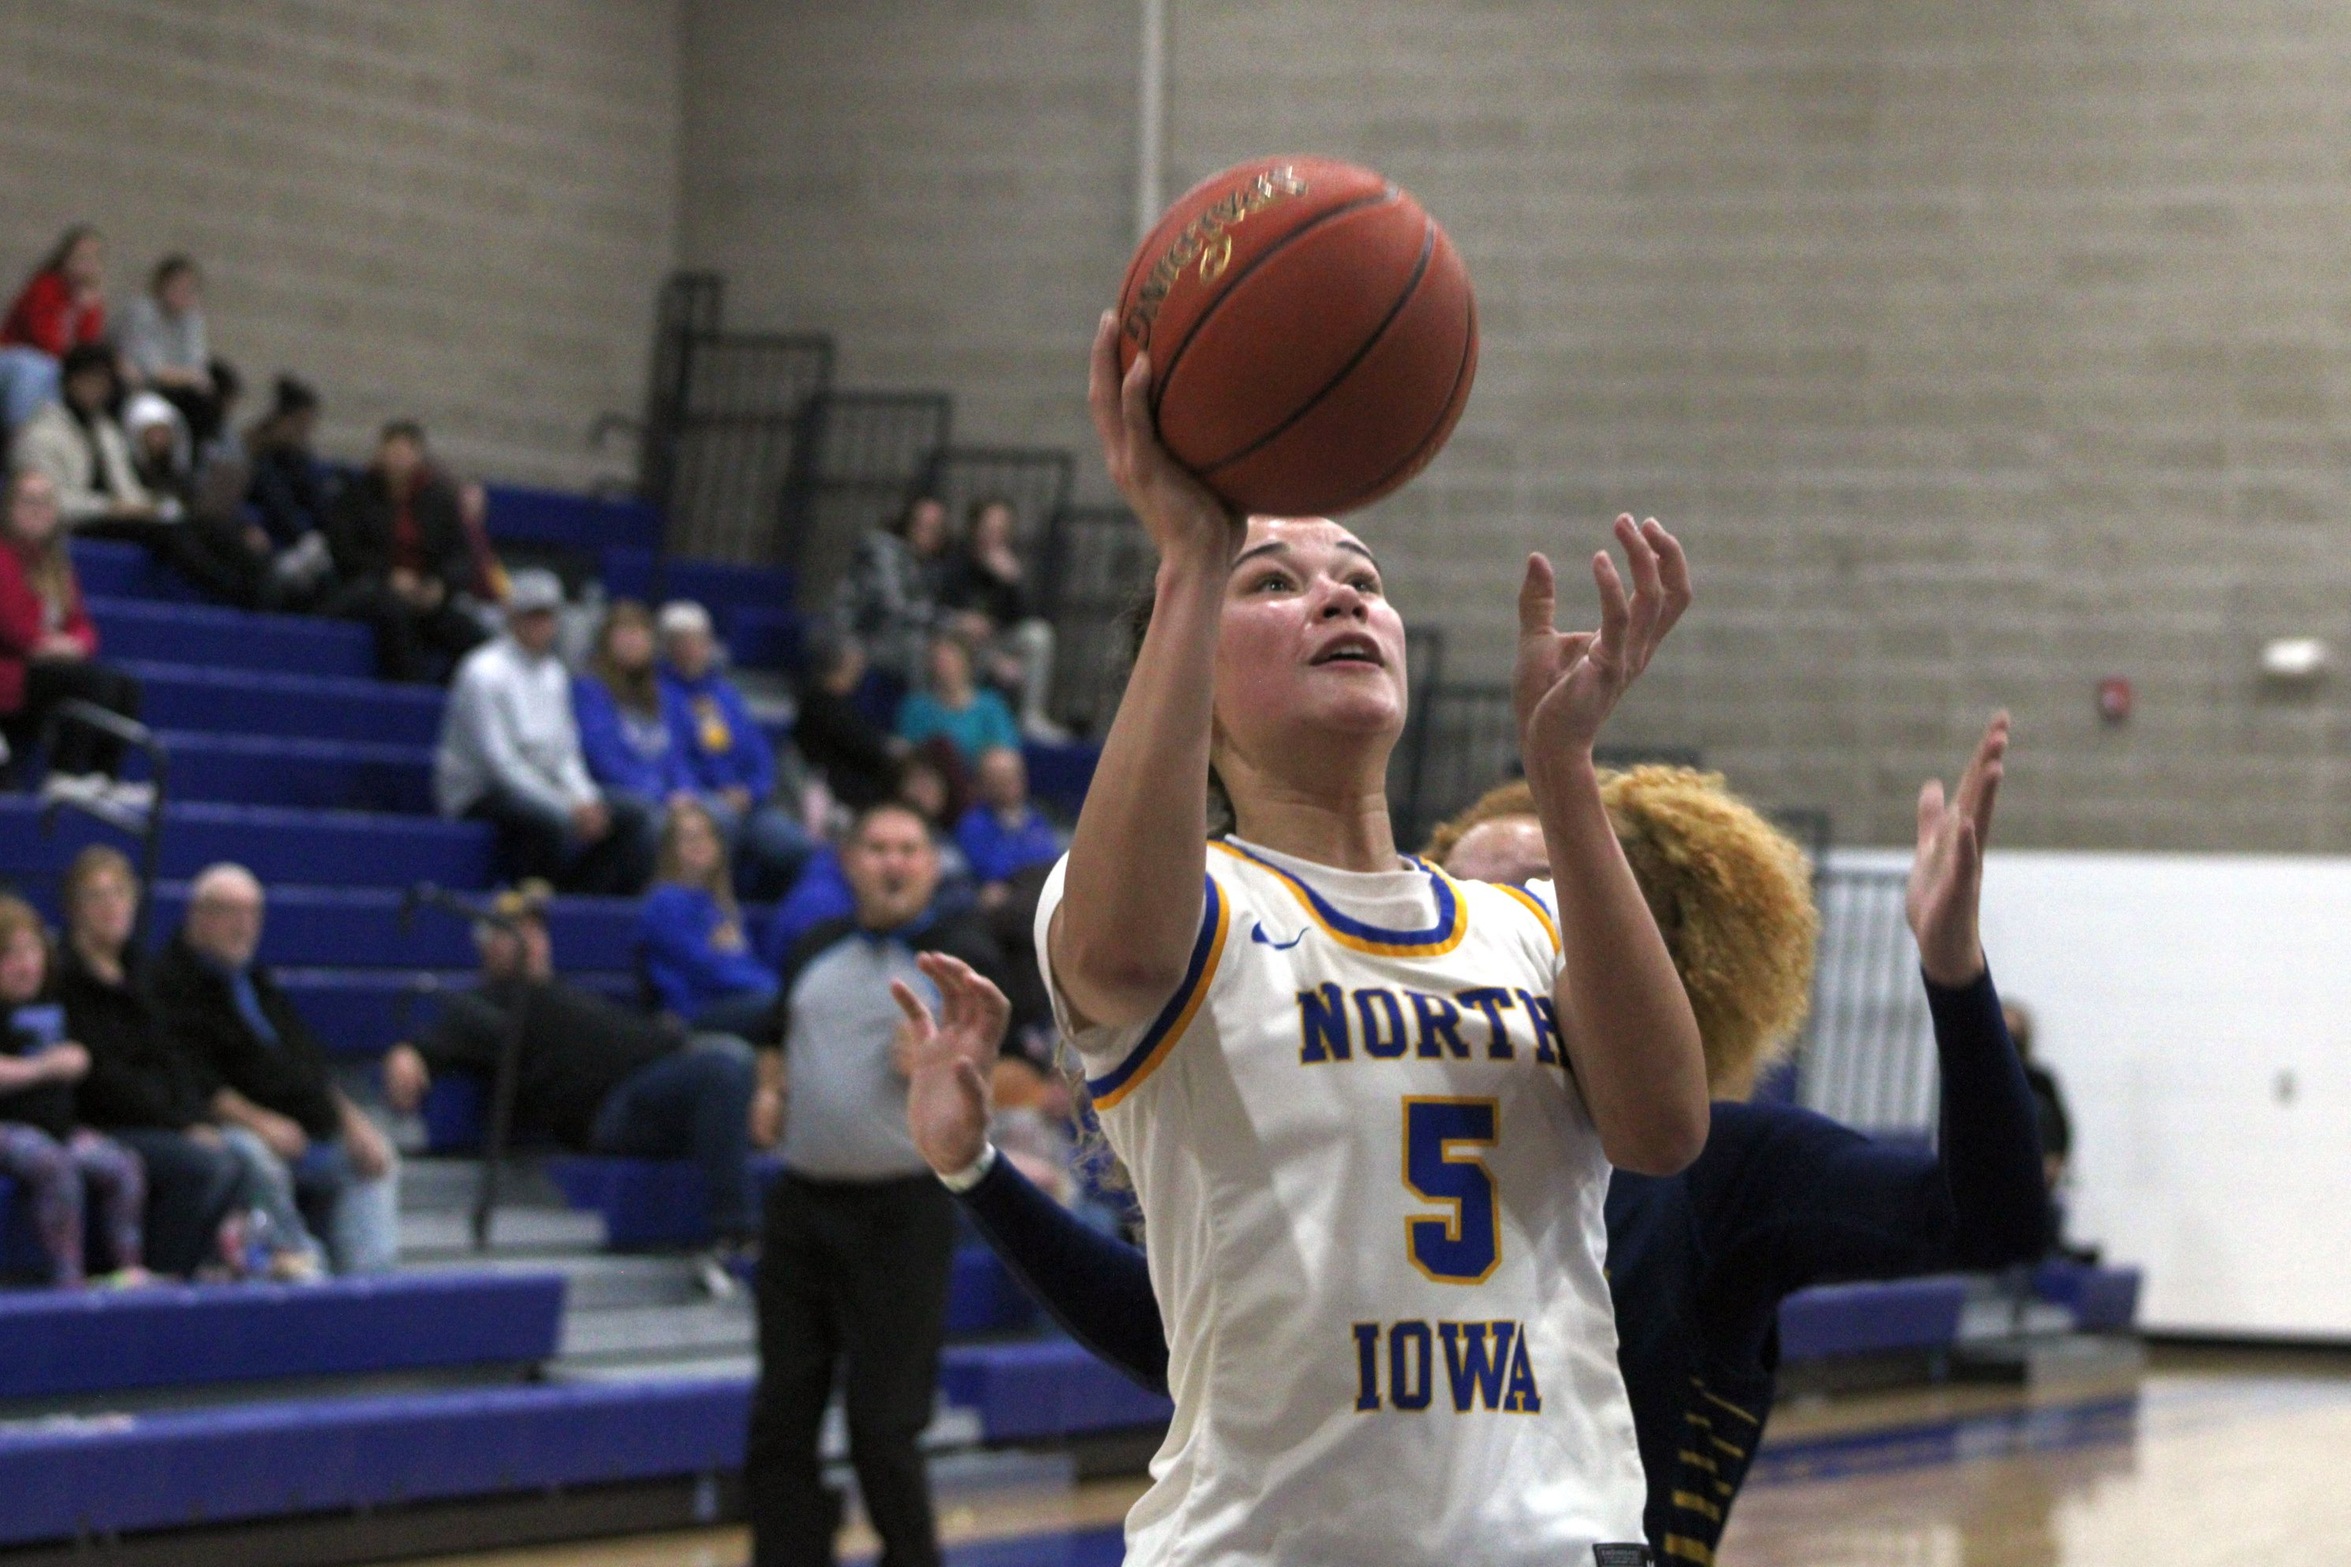 NIACC's Keiara Anderson drives to the basket in Wednesday's ICCAC contest against Marshalltown CC.